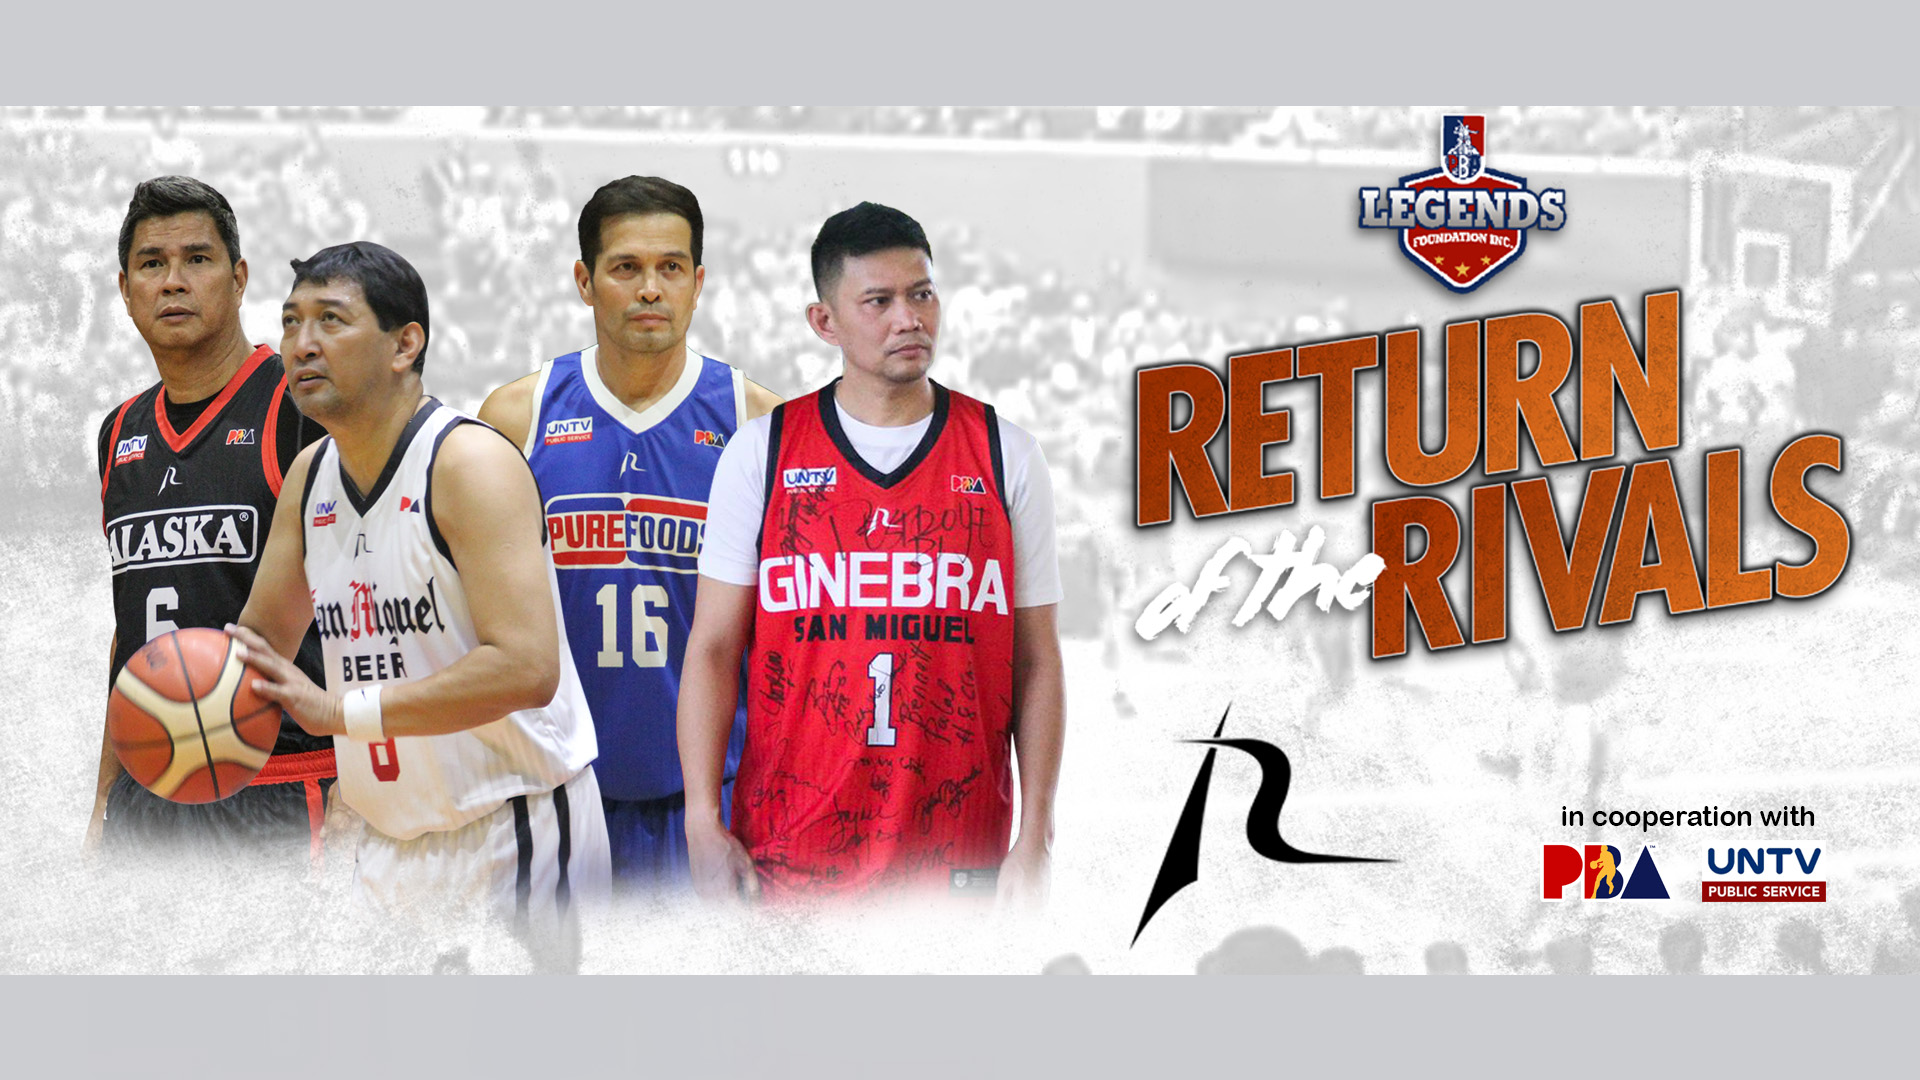 We Are Rebel Official Website Of Team Rebel Sports Pilipinas